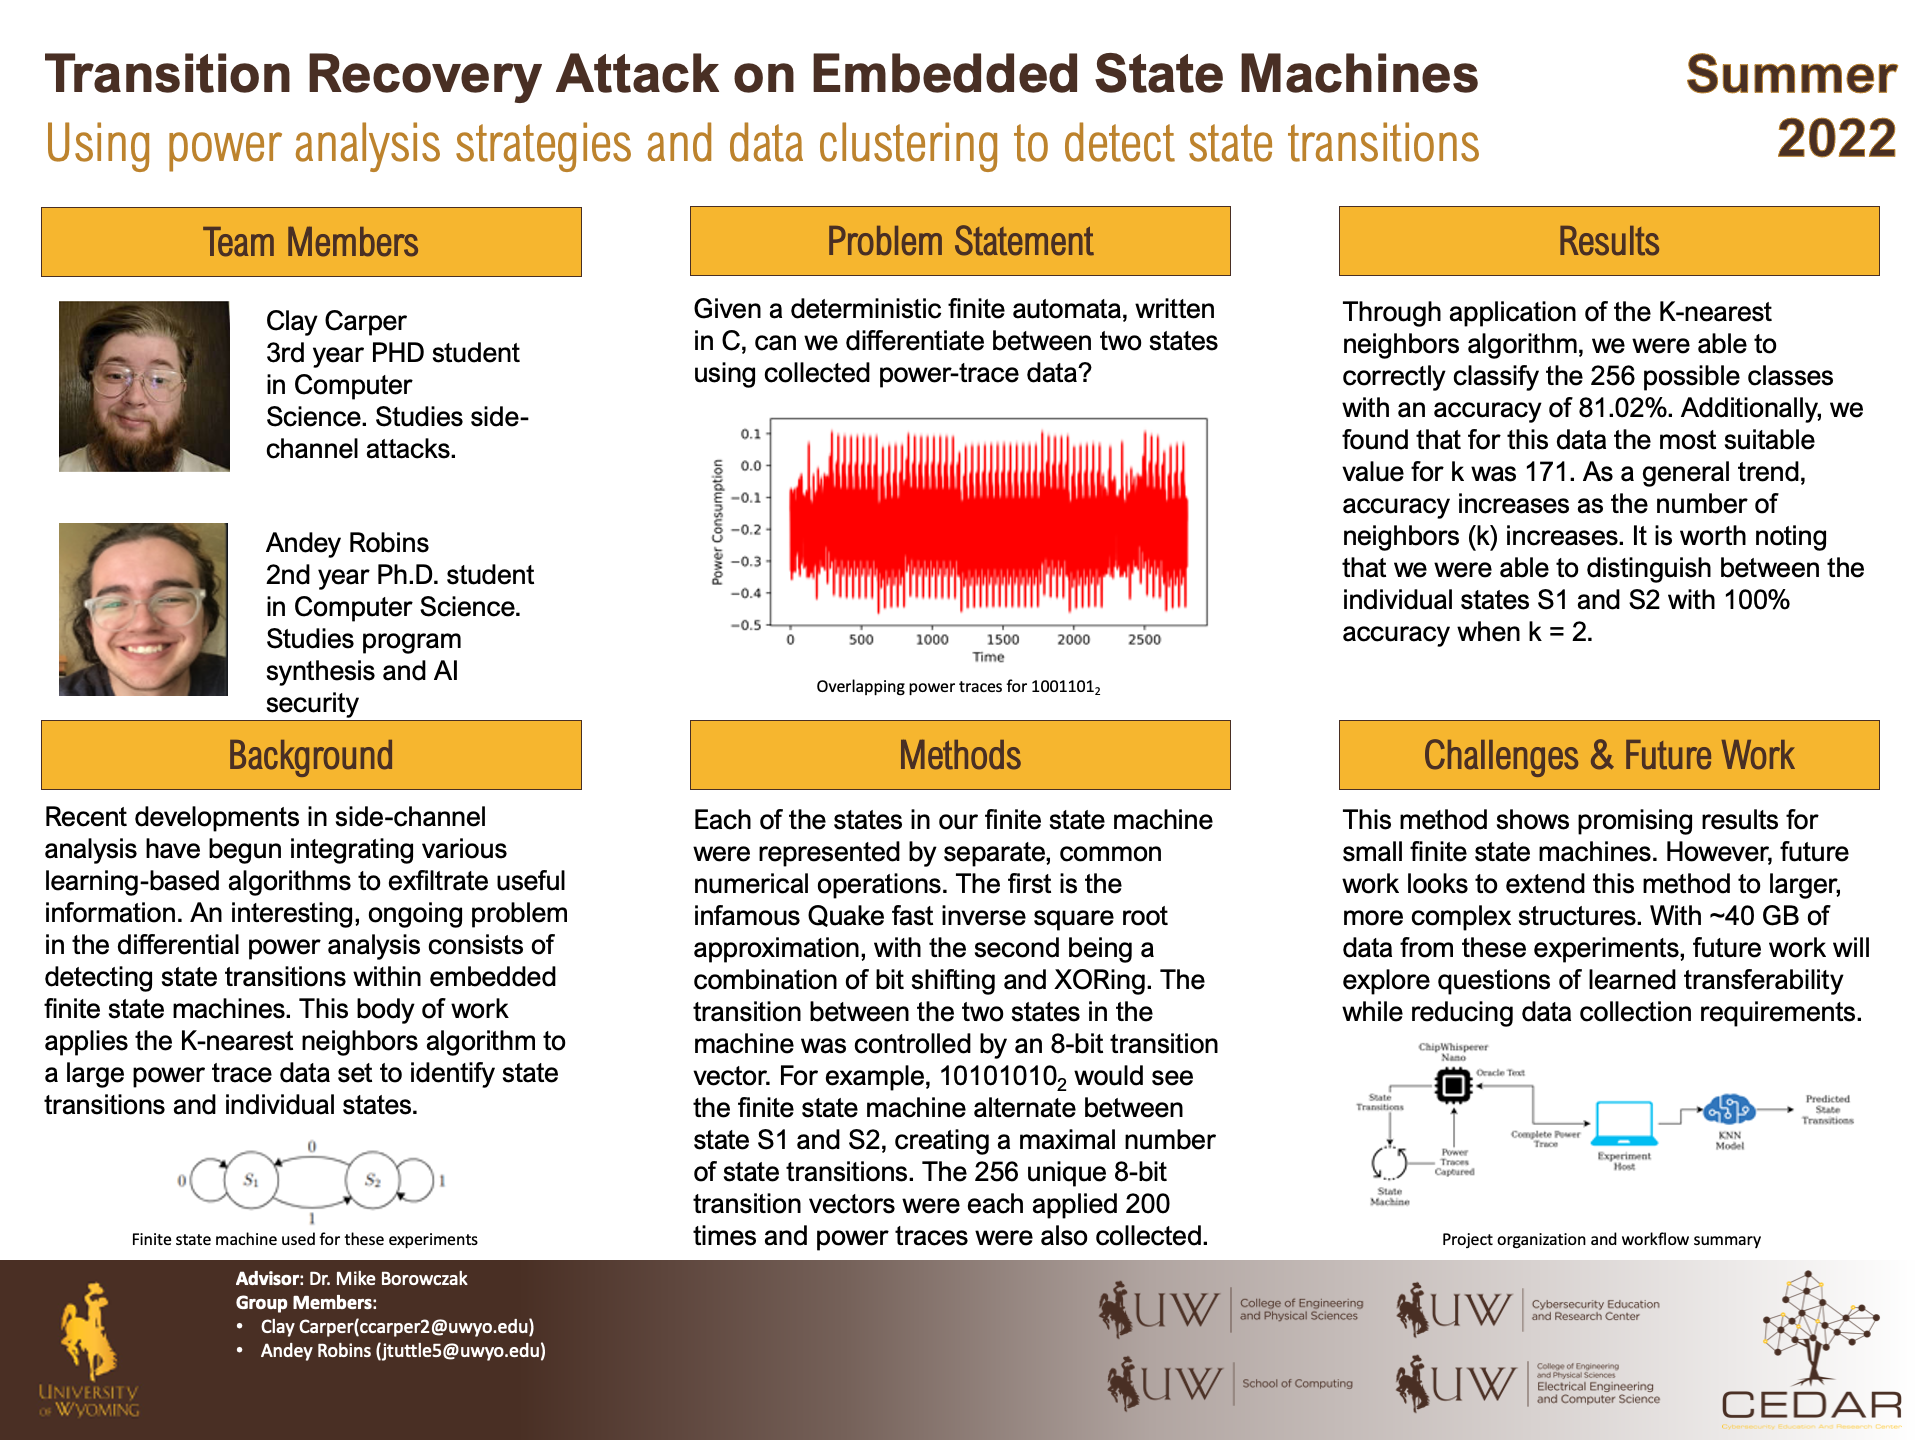  Poster for Transition Recovery Attack on Embedded State Machines Using Power Analysis